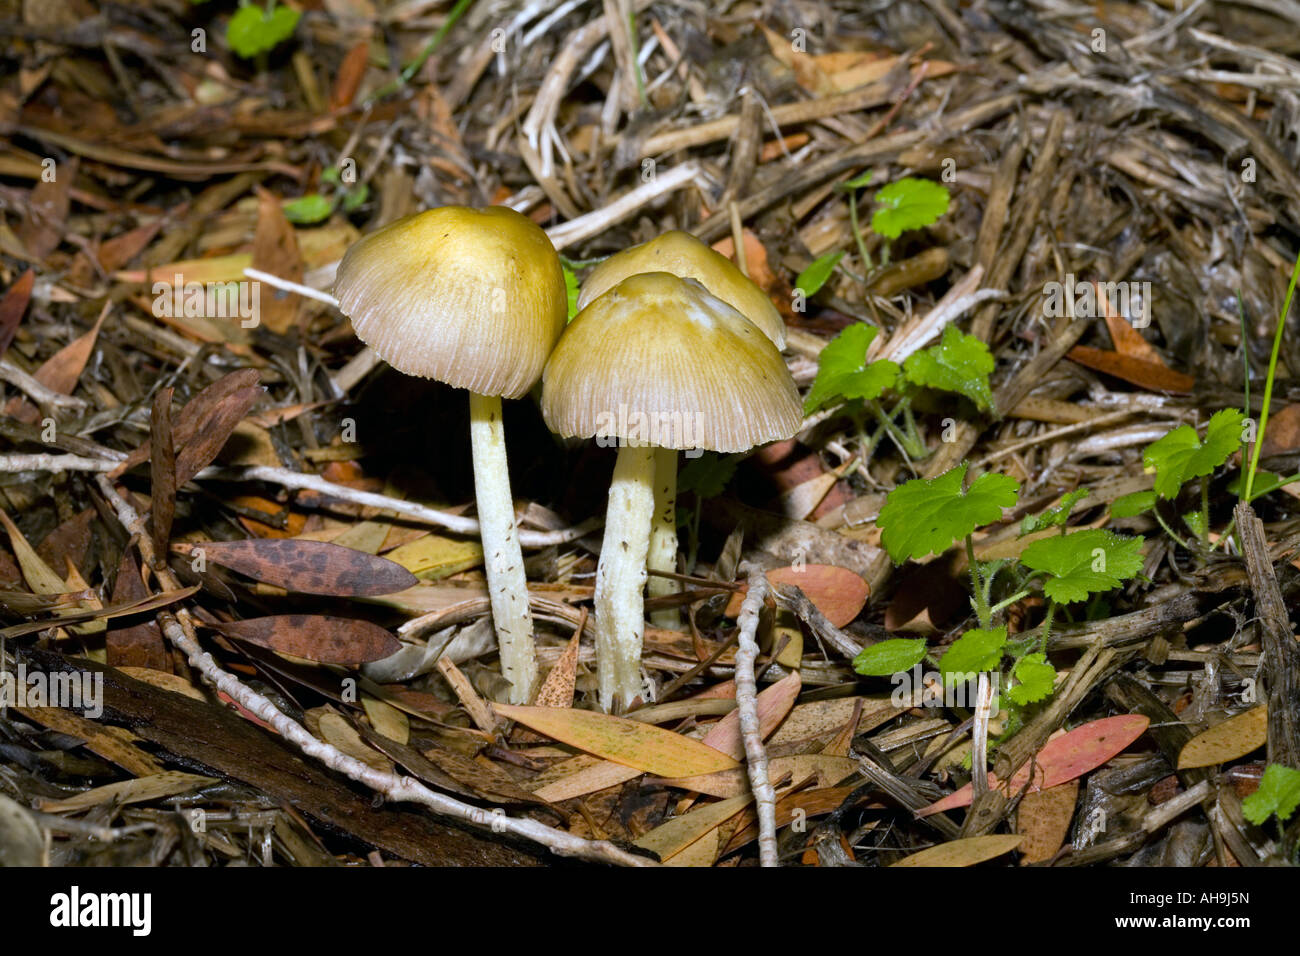 Conocybe fungus, member of the Basidiomycota group Agaricus and allies fungus with simple gills Stock Photo